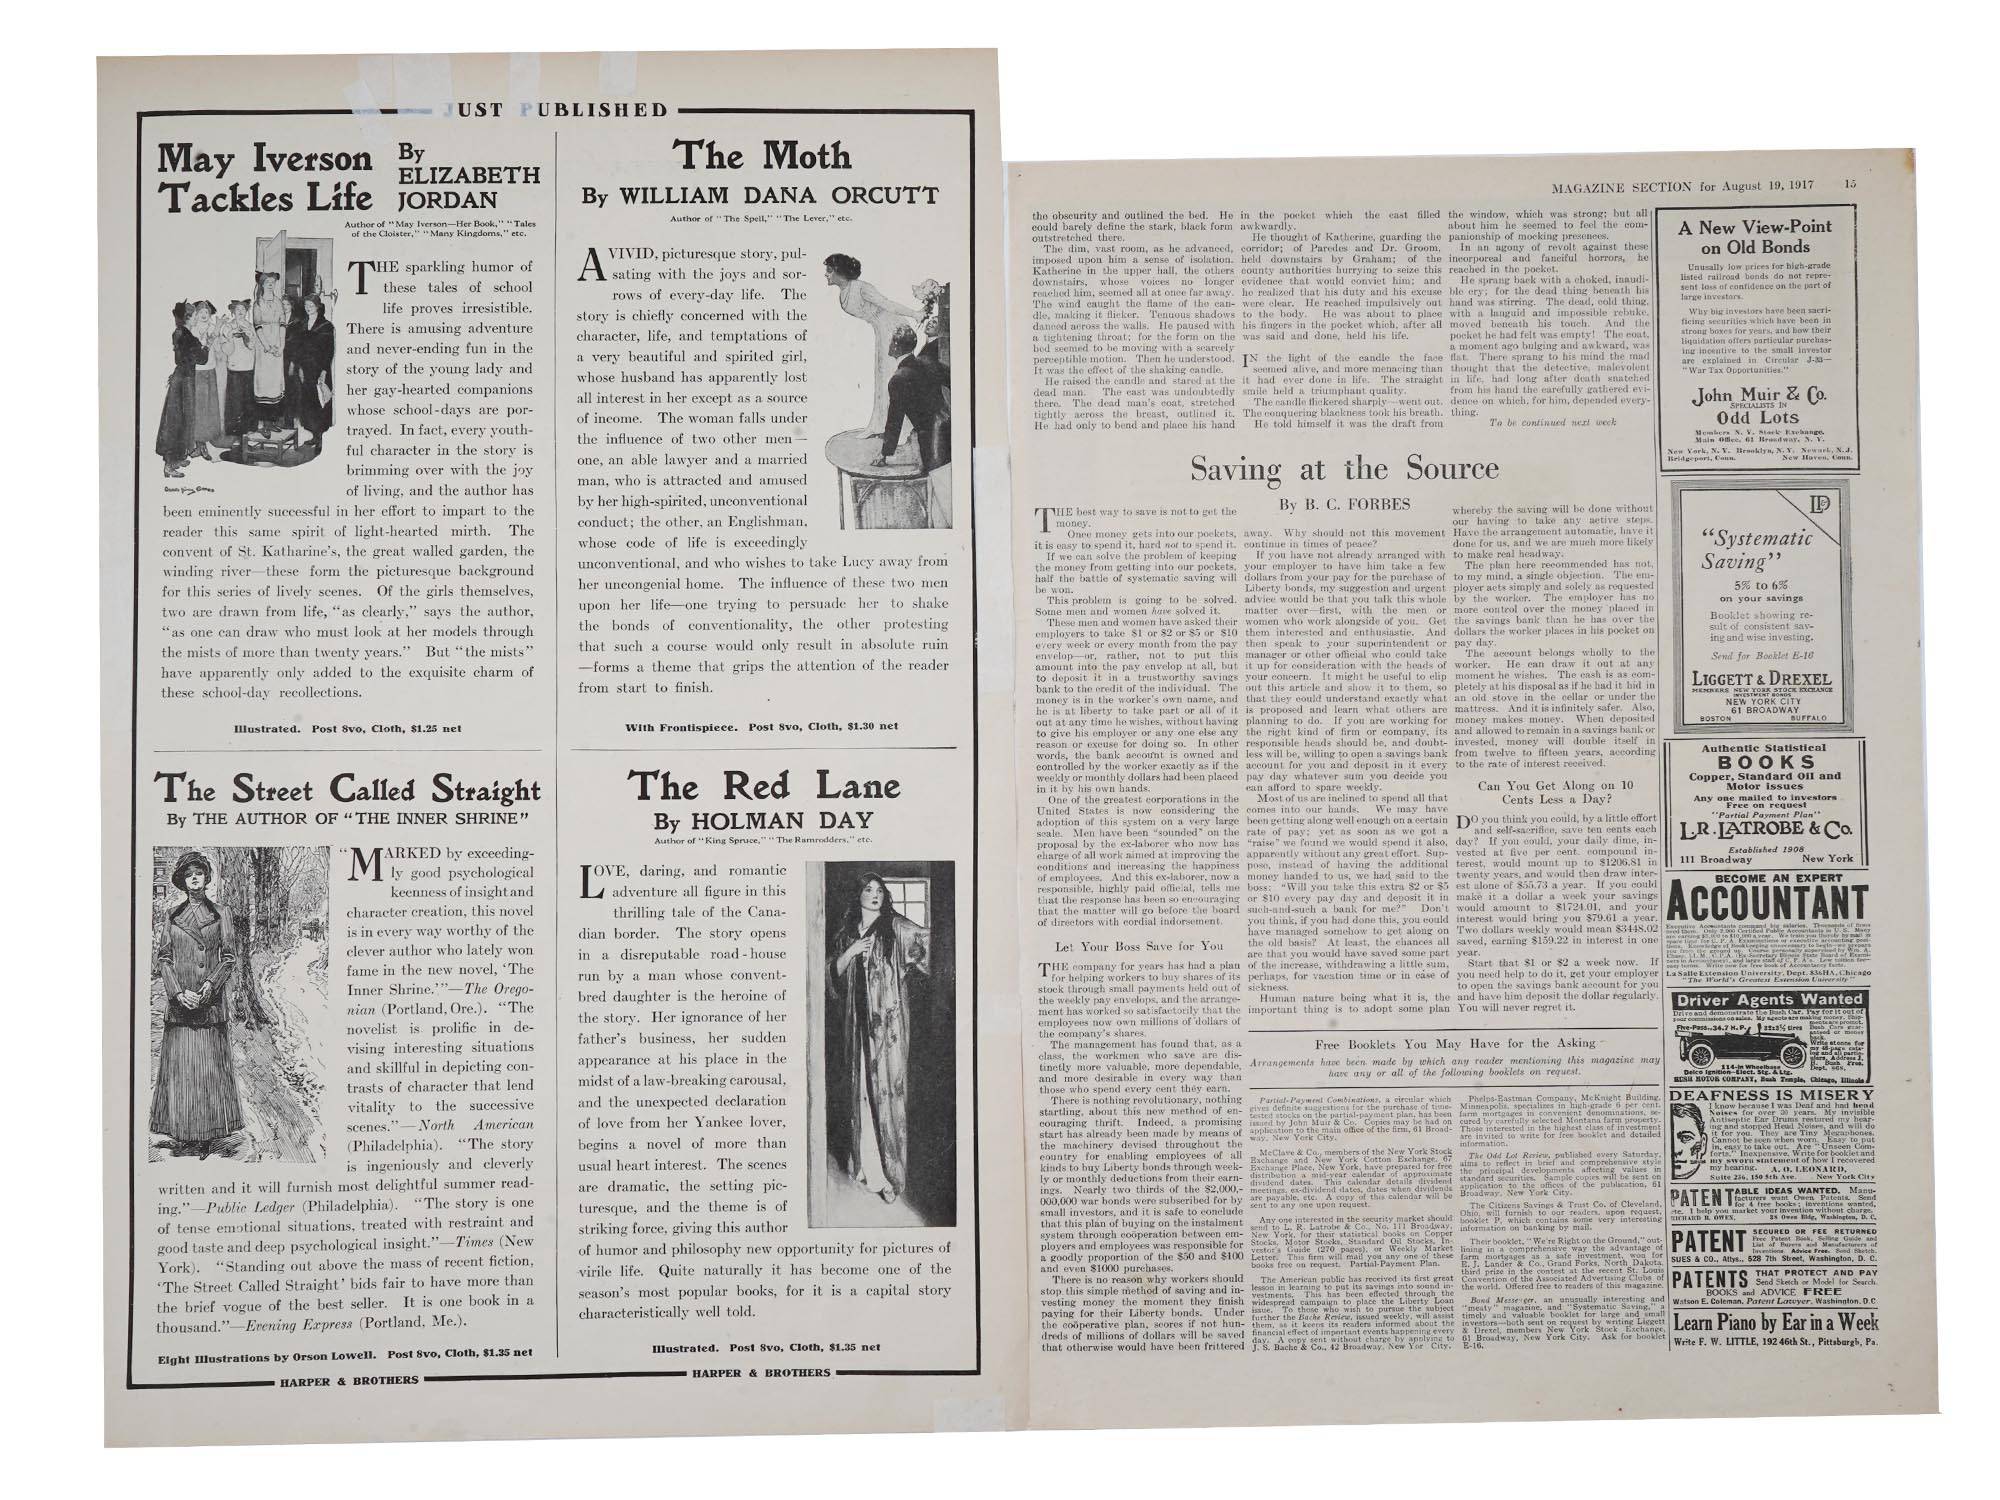 VINTAGE COCA COLA ARTICLE PAGES AND ADVERTISING PIC-1